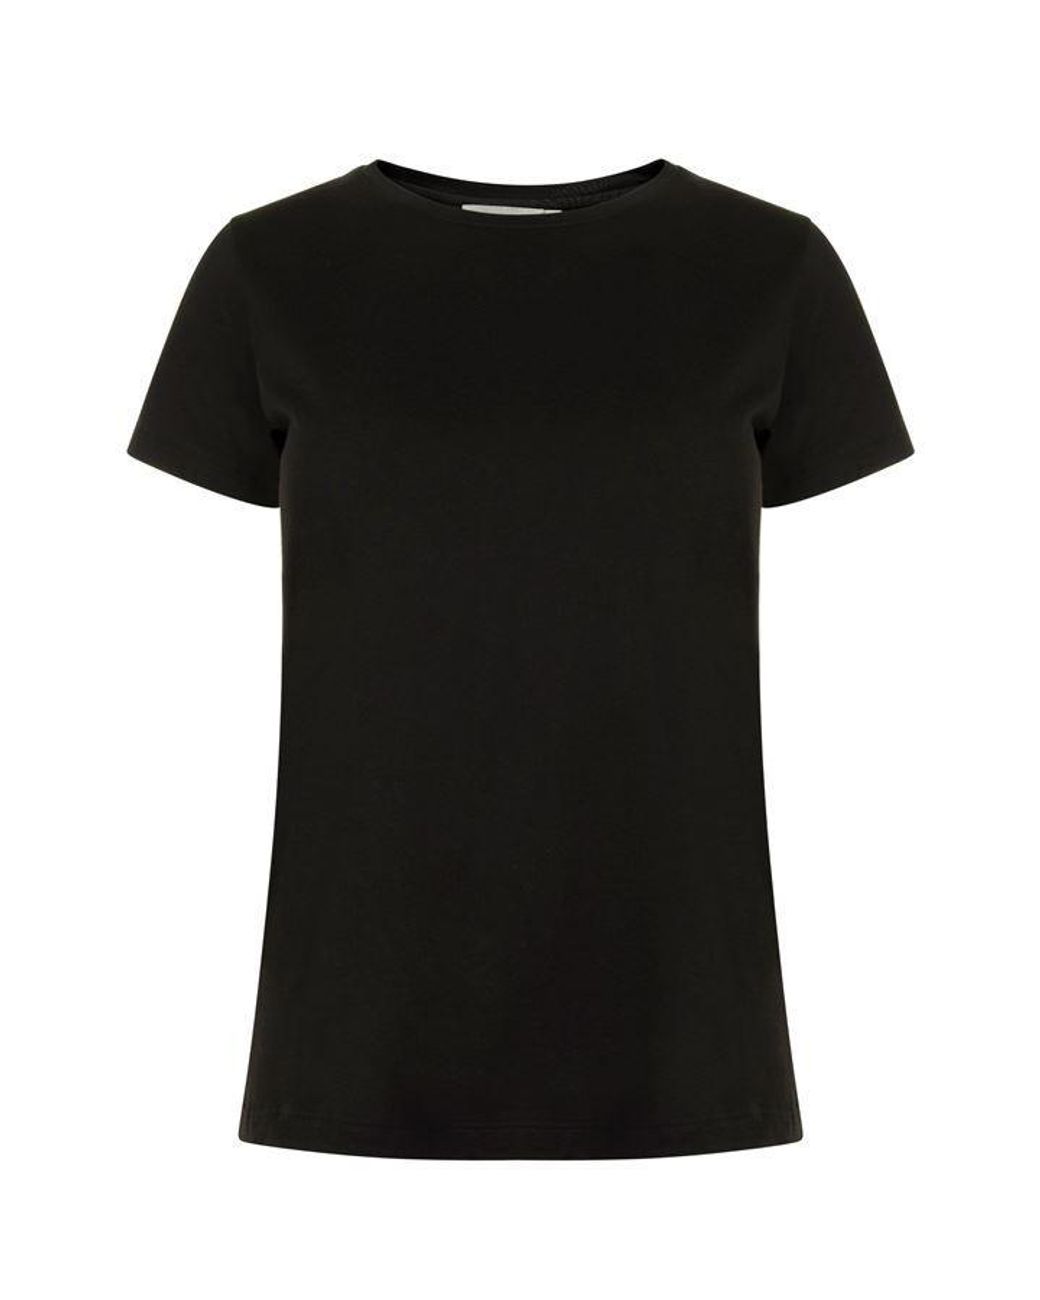 Vince Cotton Compact Jersey T Shirt in Black - Lyst